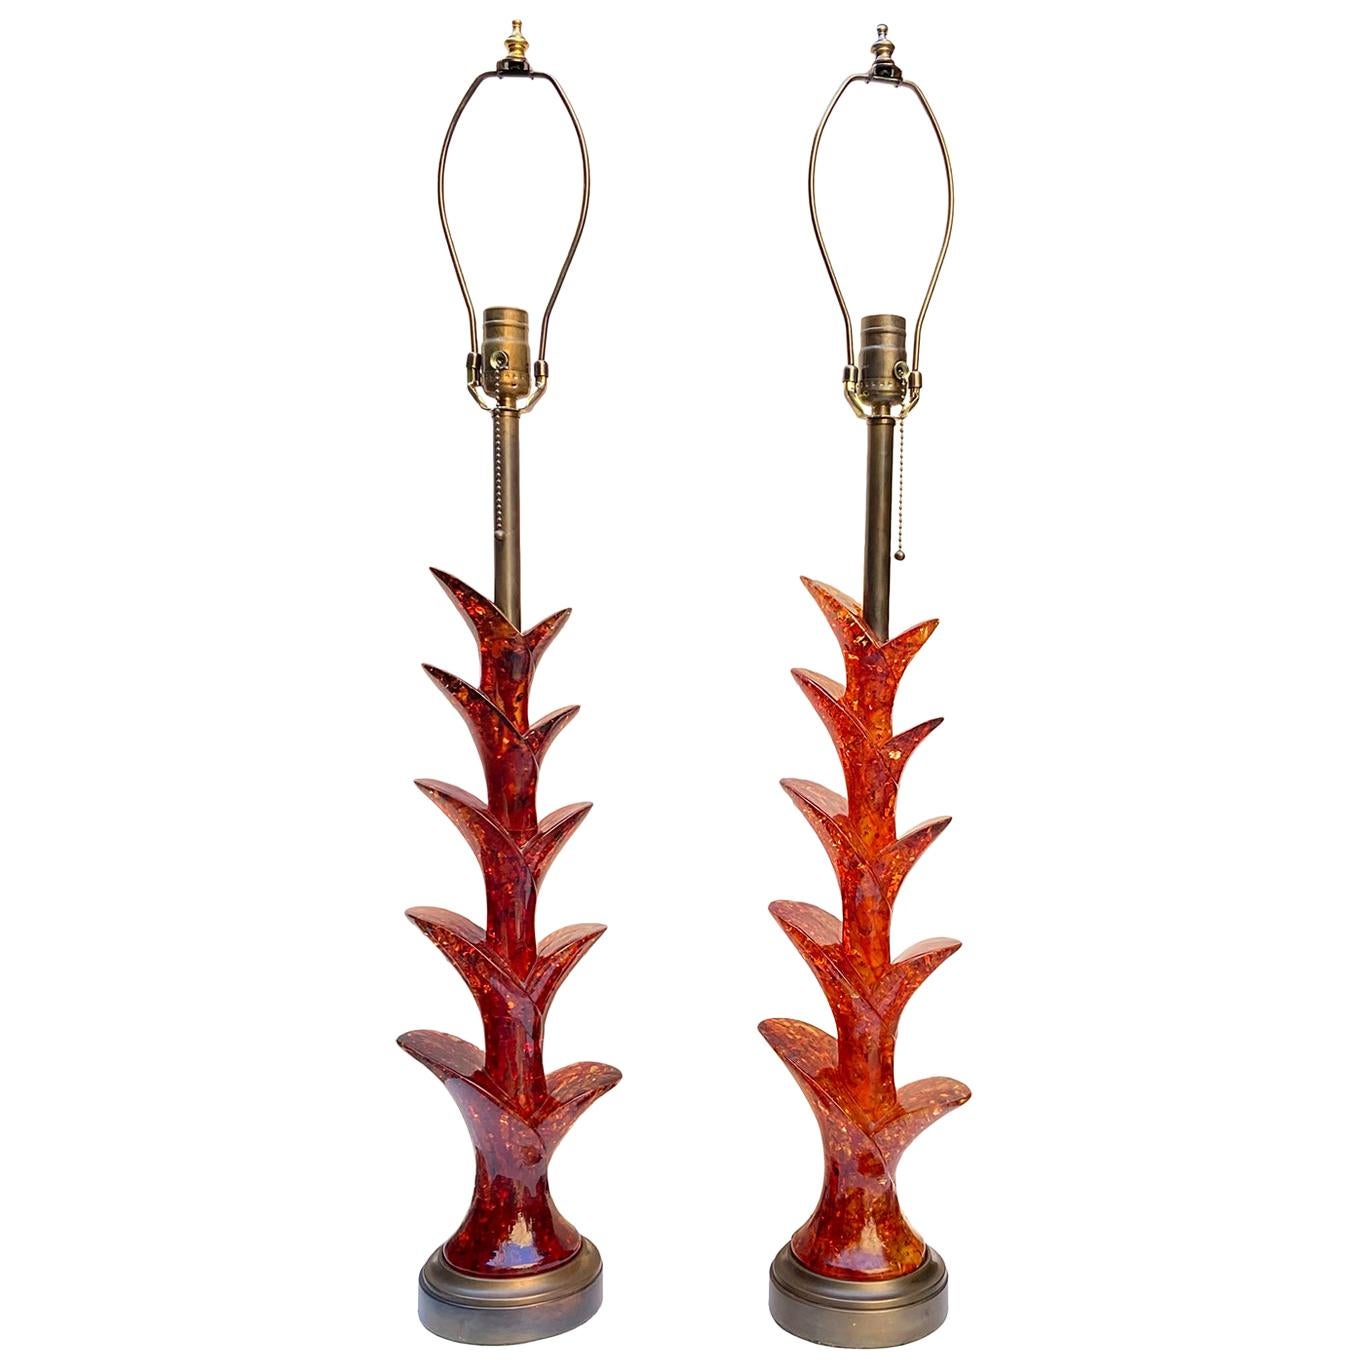 Pair of Midcentury Red Lucite Table Lamps